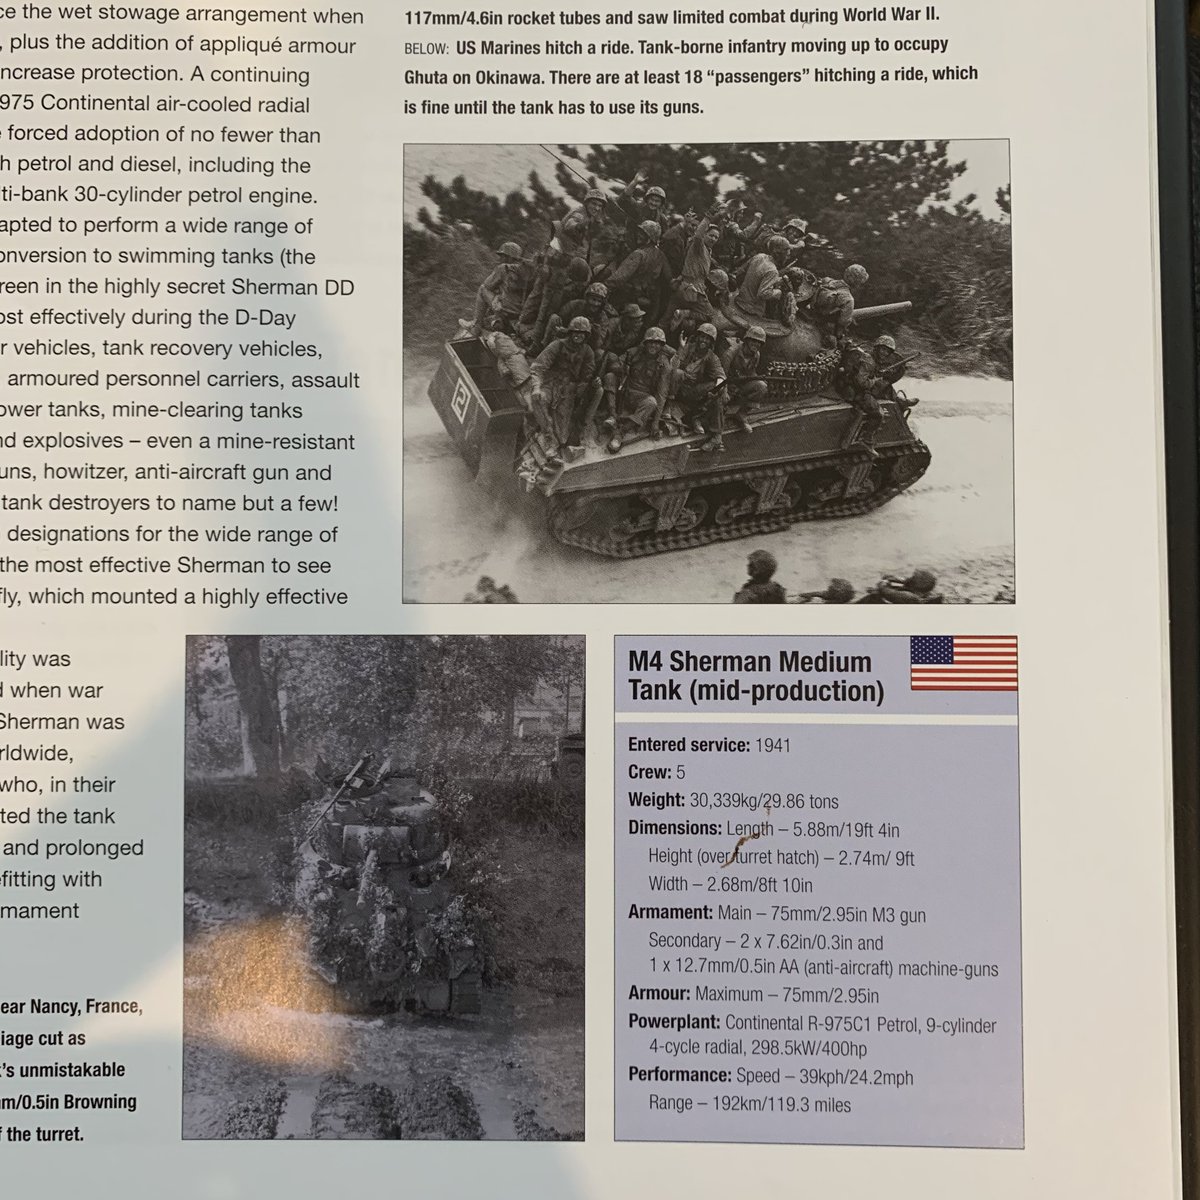 For reference, the Sherman tank could reach almost 25mph under absolute ideal conditions – think: wide, smooth roads free of mud and ice, clear weather, and no one shooting at them. This was very rarely if ever the case. To cover that distance in a day was really impressive.